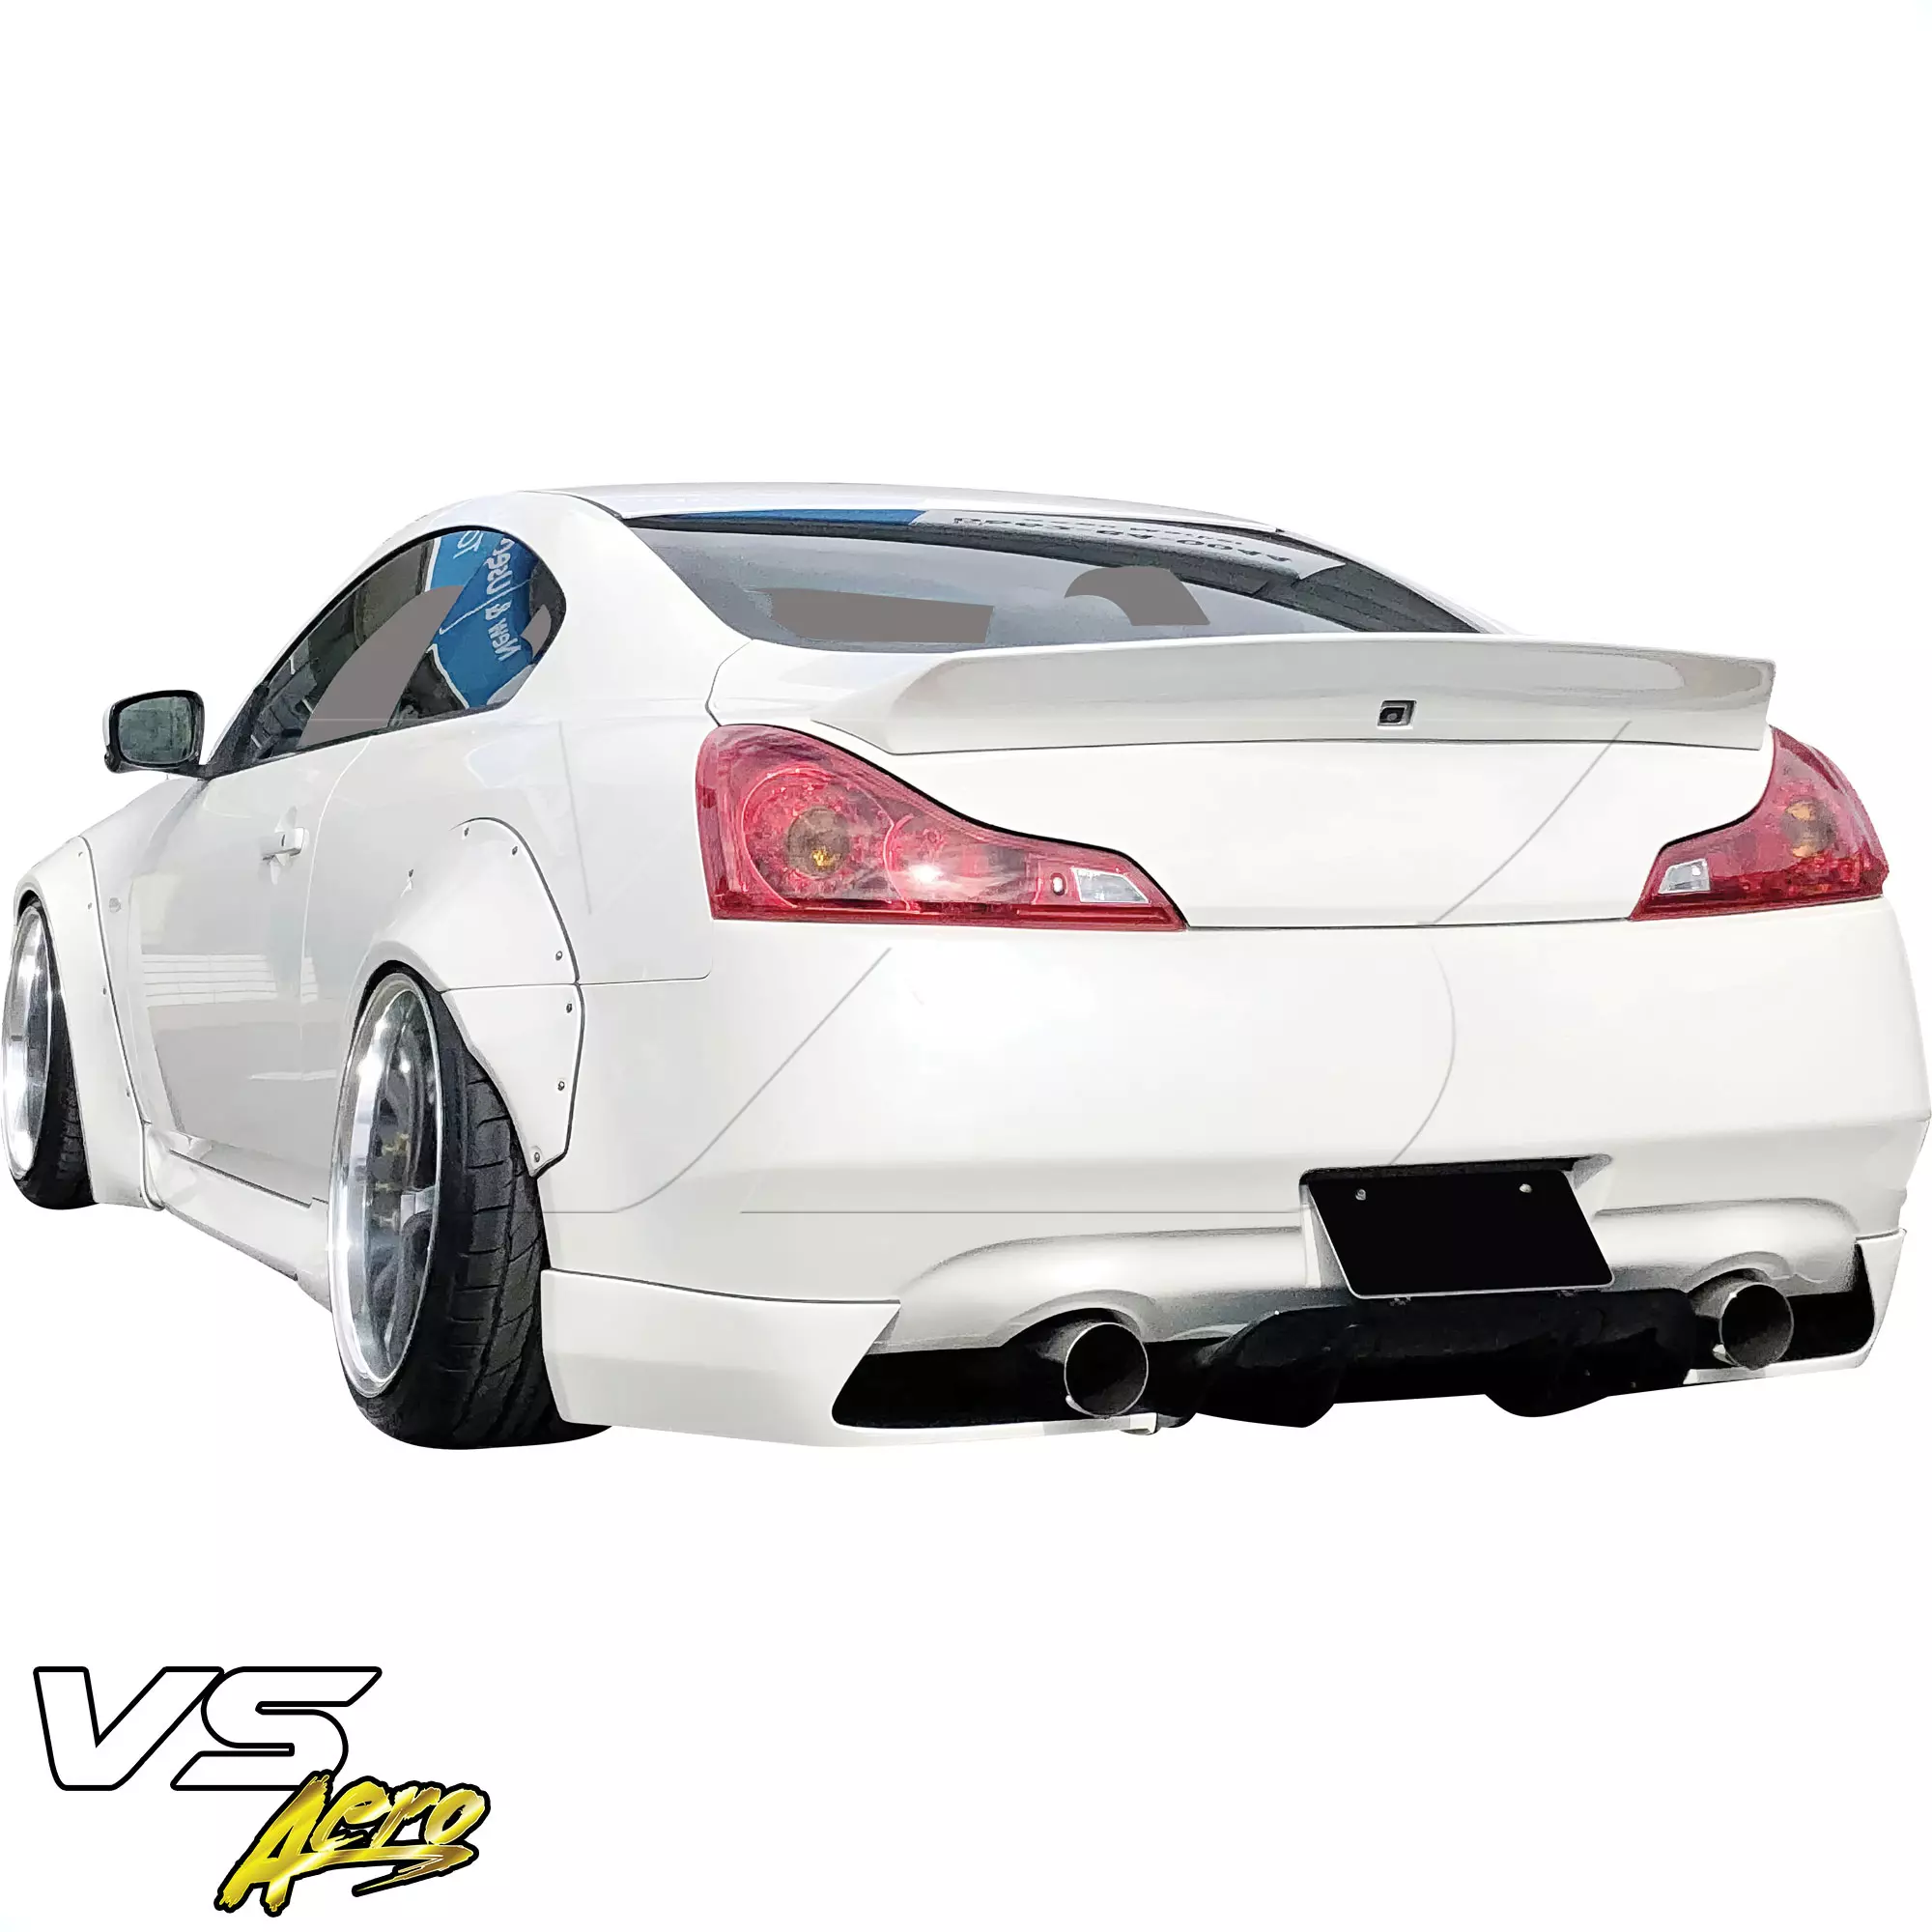 VSaero FRP LBPE Wide Body Fender Flares (rear) 4pc > Infiniti G37 Coupe 2008-2015 > 2dr Coupe - Image 3